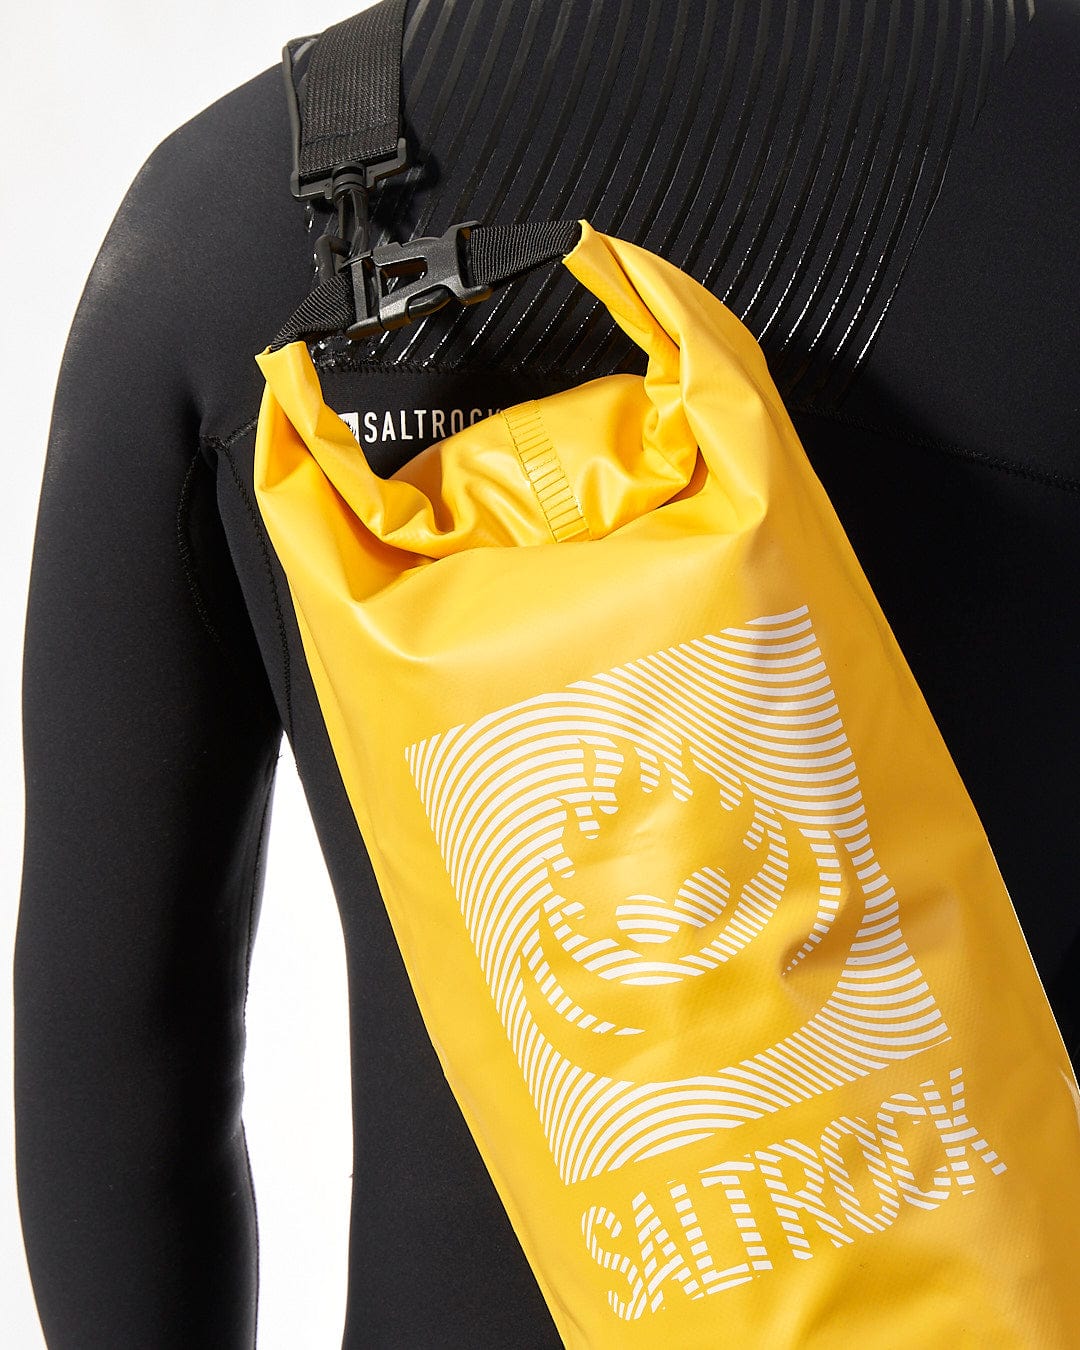 A waterproof yellow wetsuit featuring the word Saltrock.
becomes:
A waterproof yellow Wave - 10L Drybag - Yellow wetsuit featuring the word Saltrock.